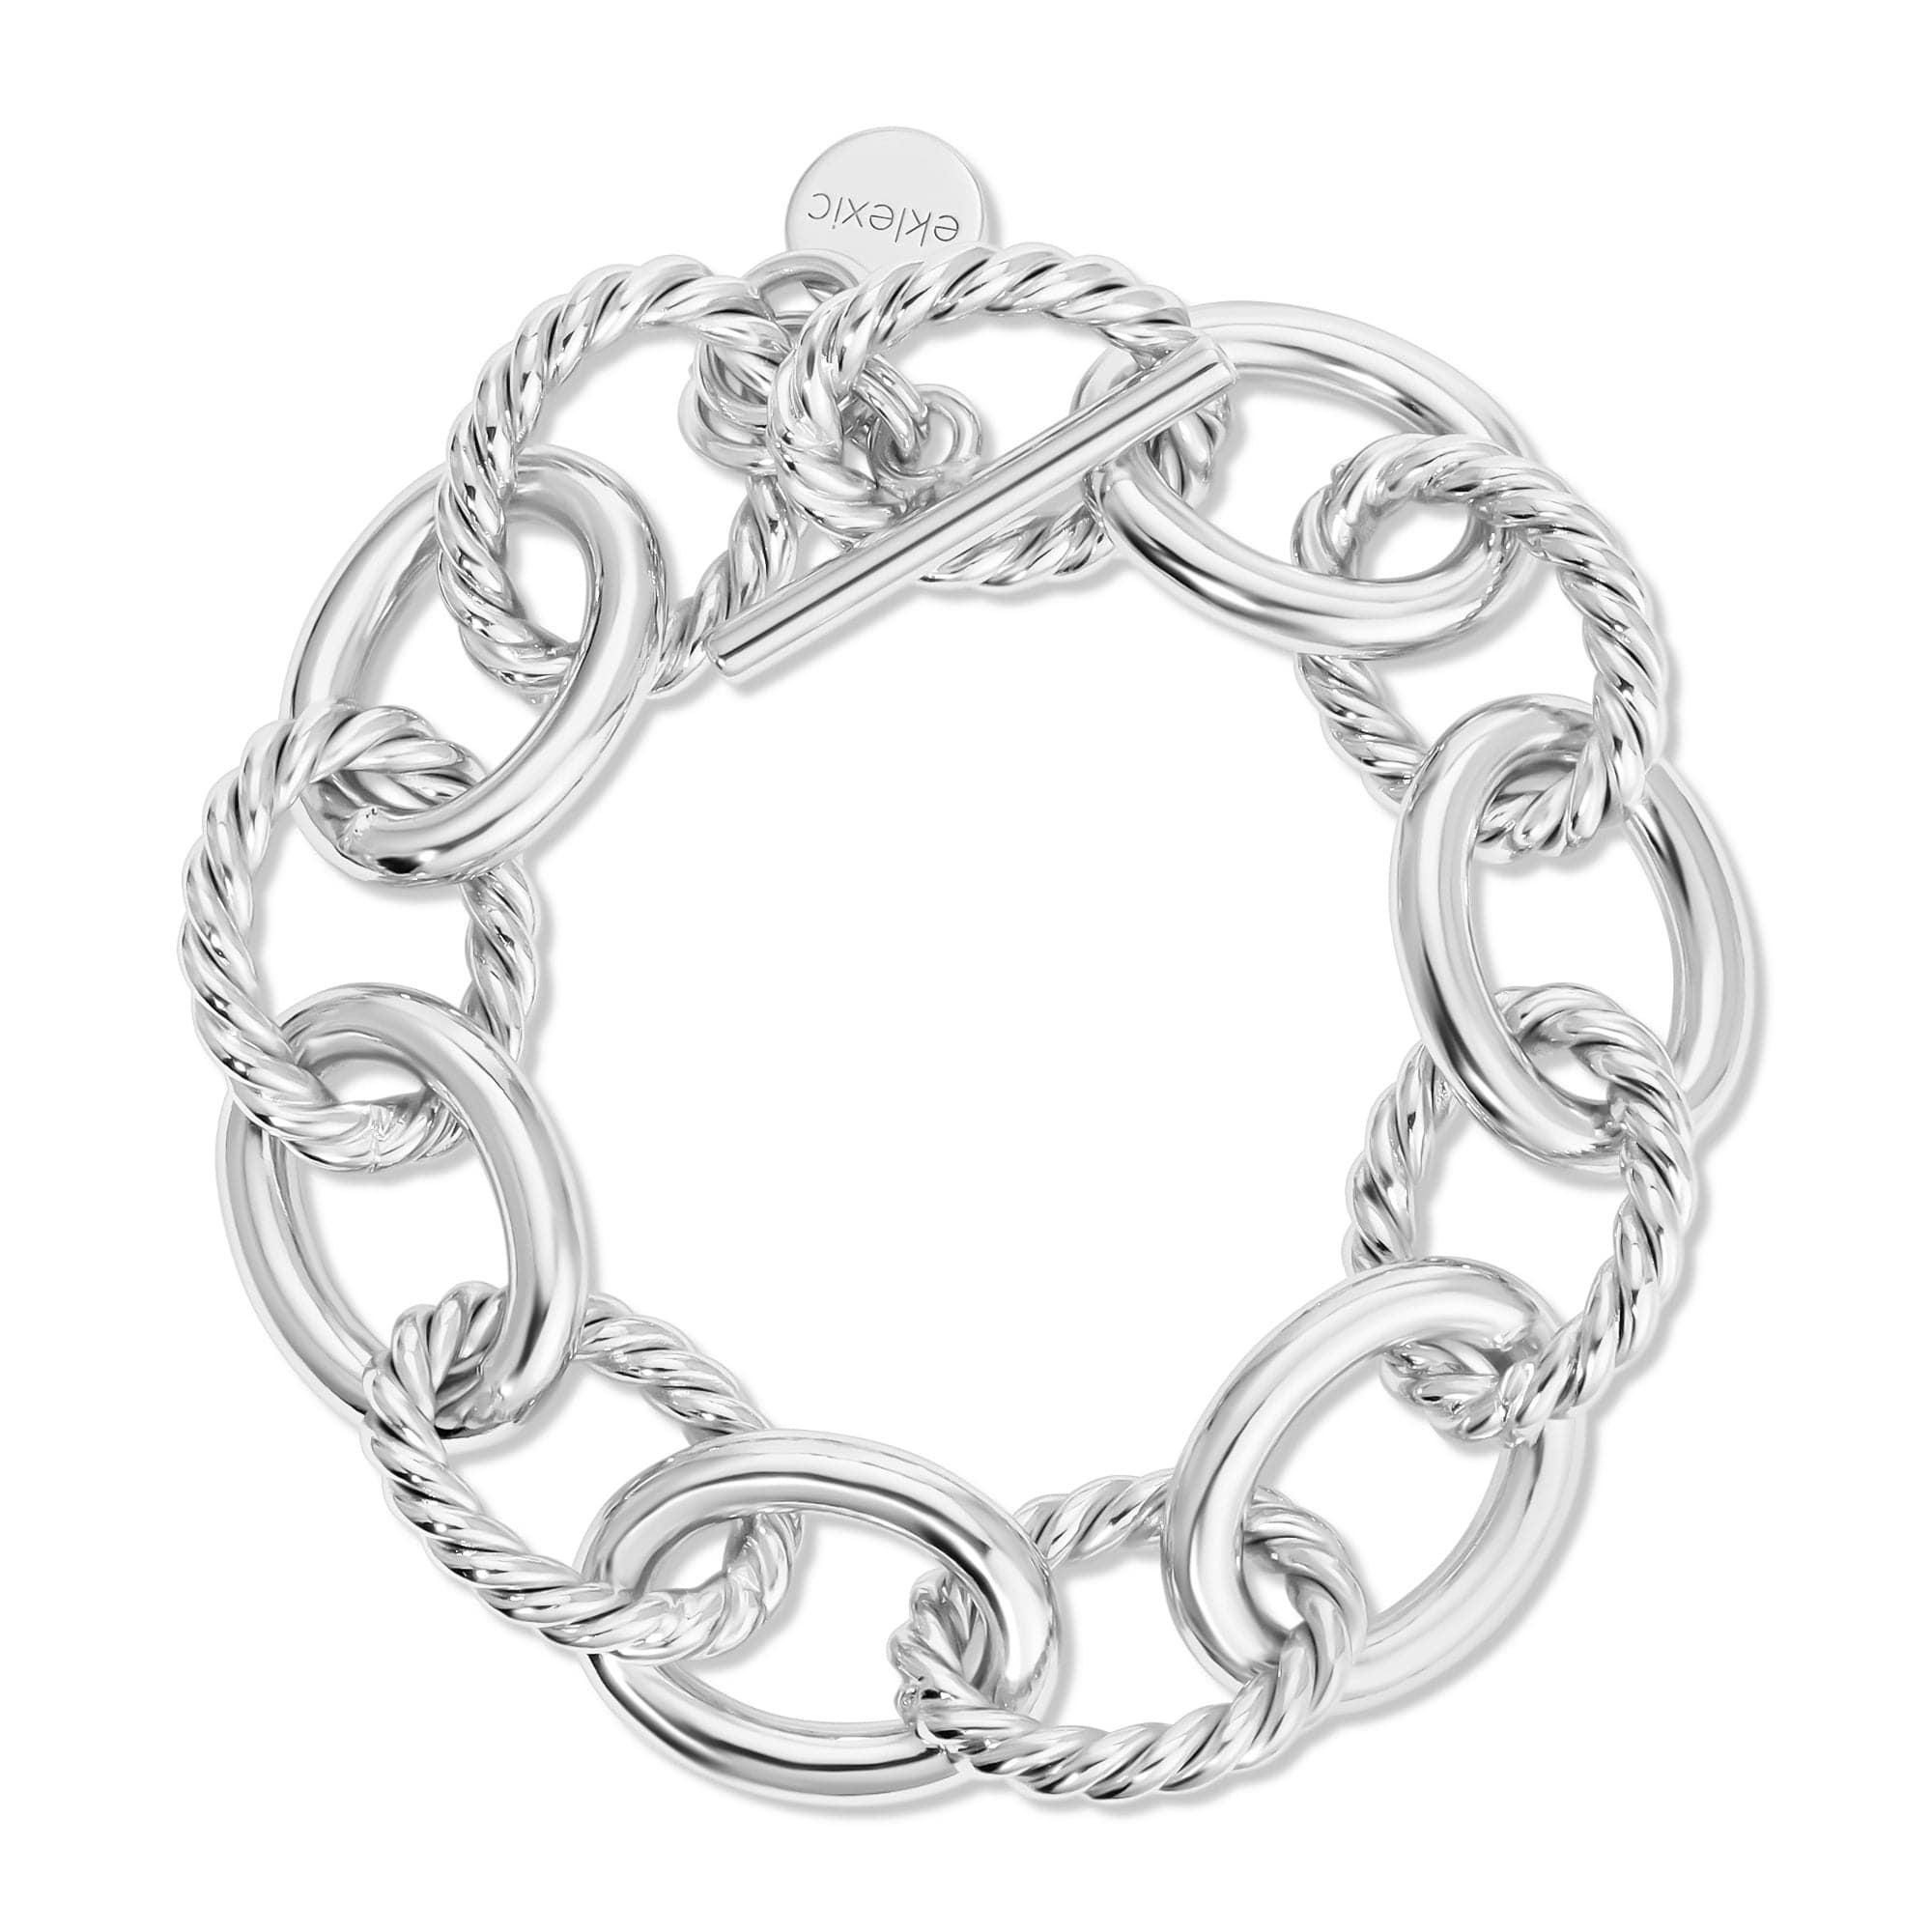 a silver bracelet with a chain on it